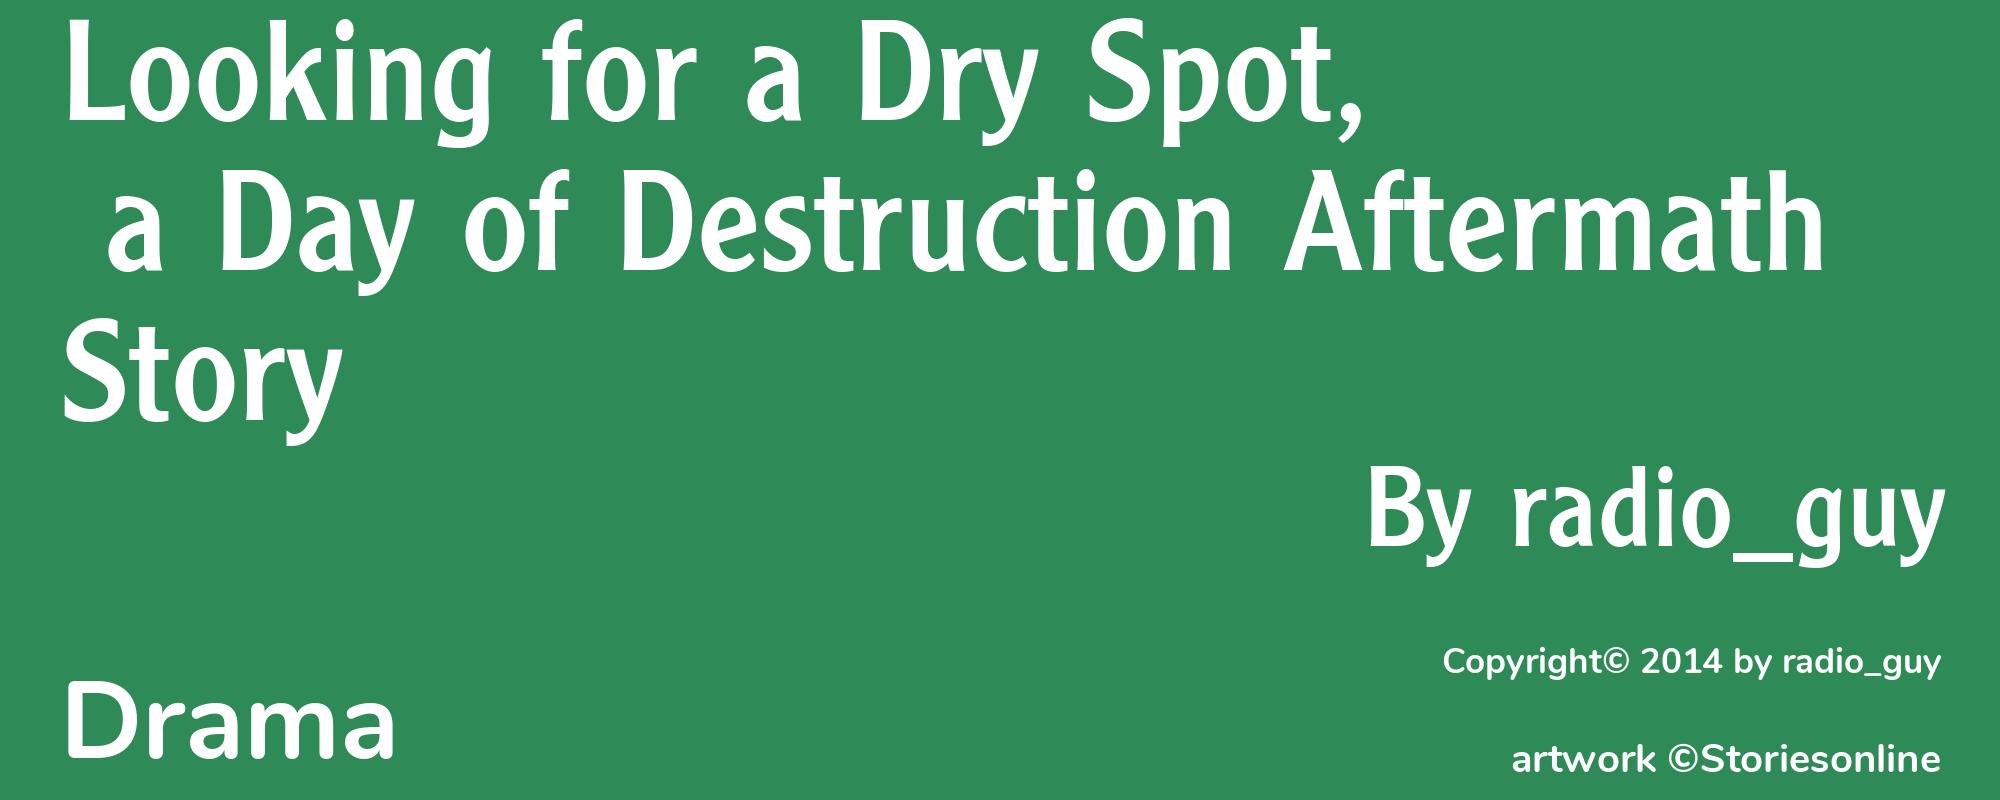 Looking for a Dry Spot, a Day of Destruction Aftermath Story - Cover